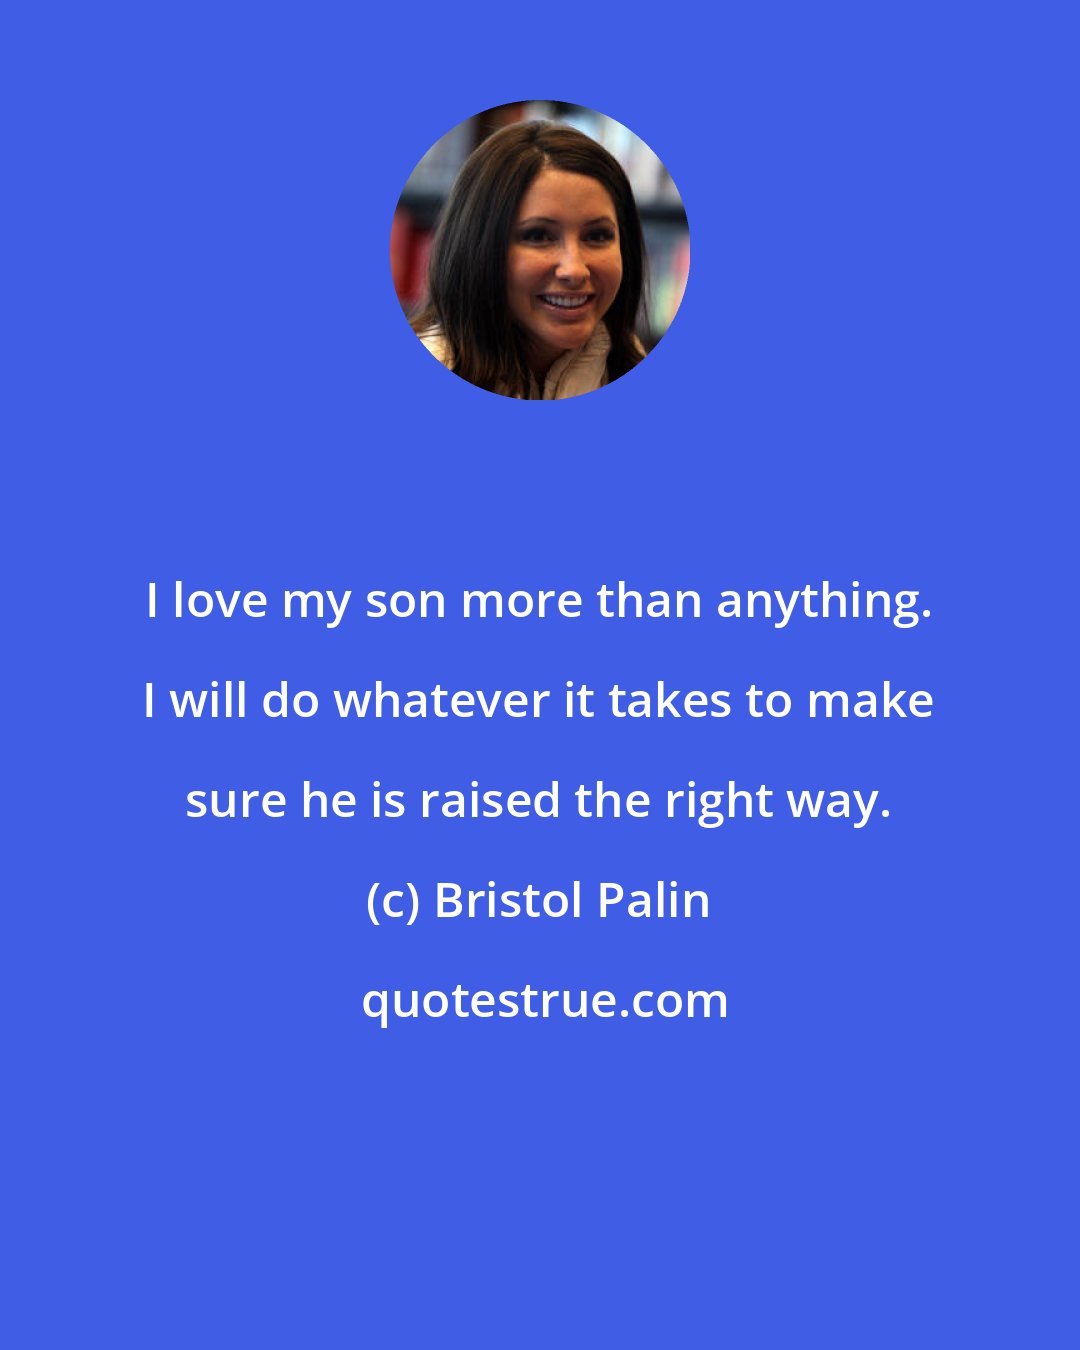 Bristol Palin: I love my son more than anything. I will do whatever it takes to make sure he is raised the right way.